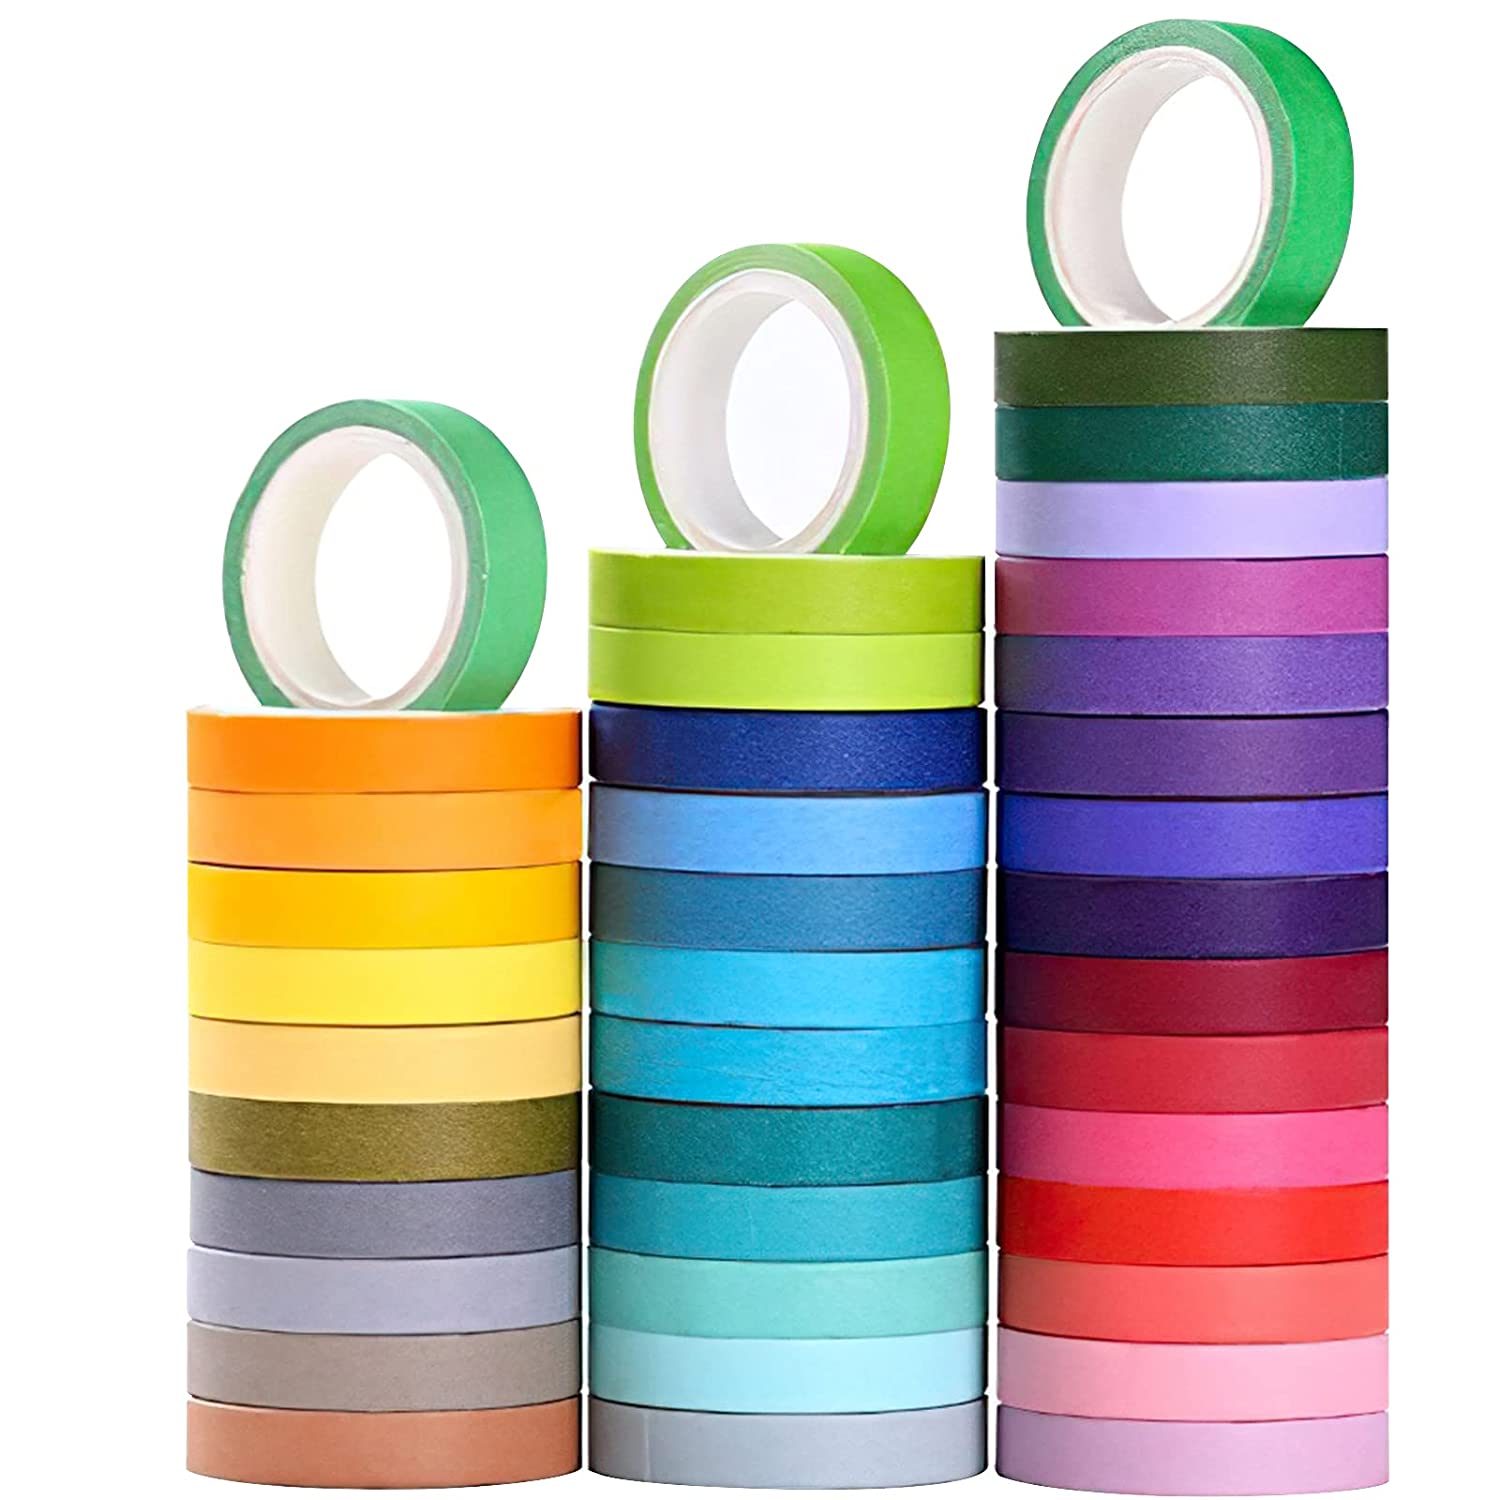 BA-004 40 Rolls Washi Tape Set, Decorative Masking DIY Tapes for Children and Gifts Warpping (Mix)